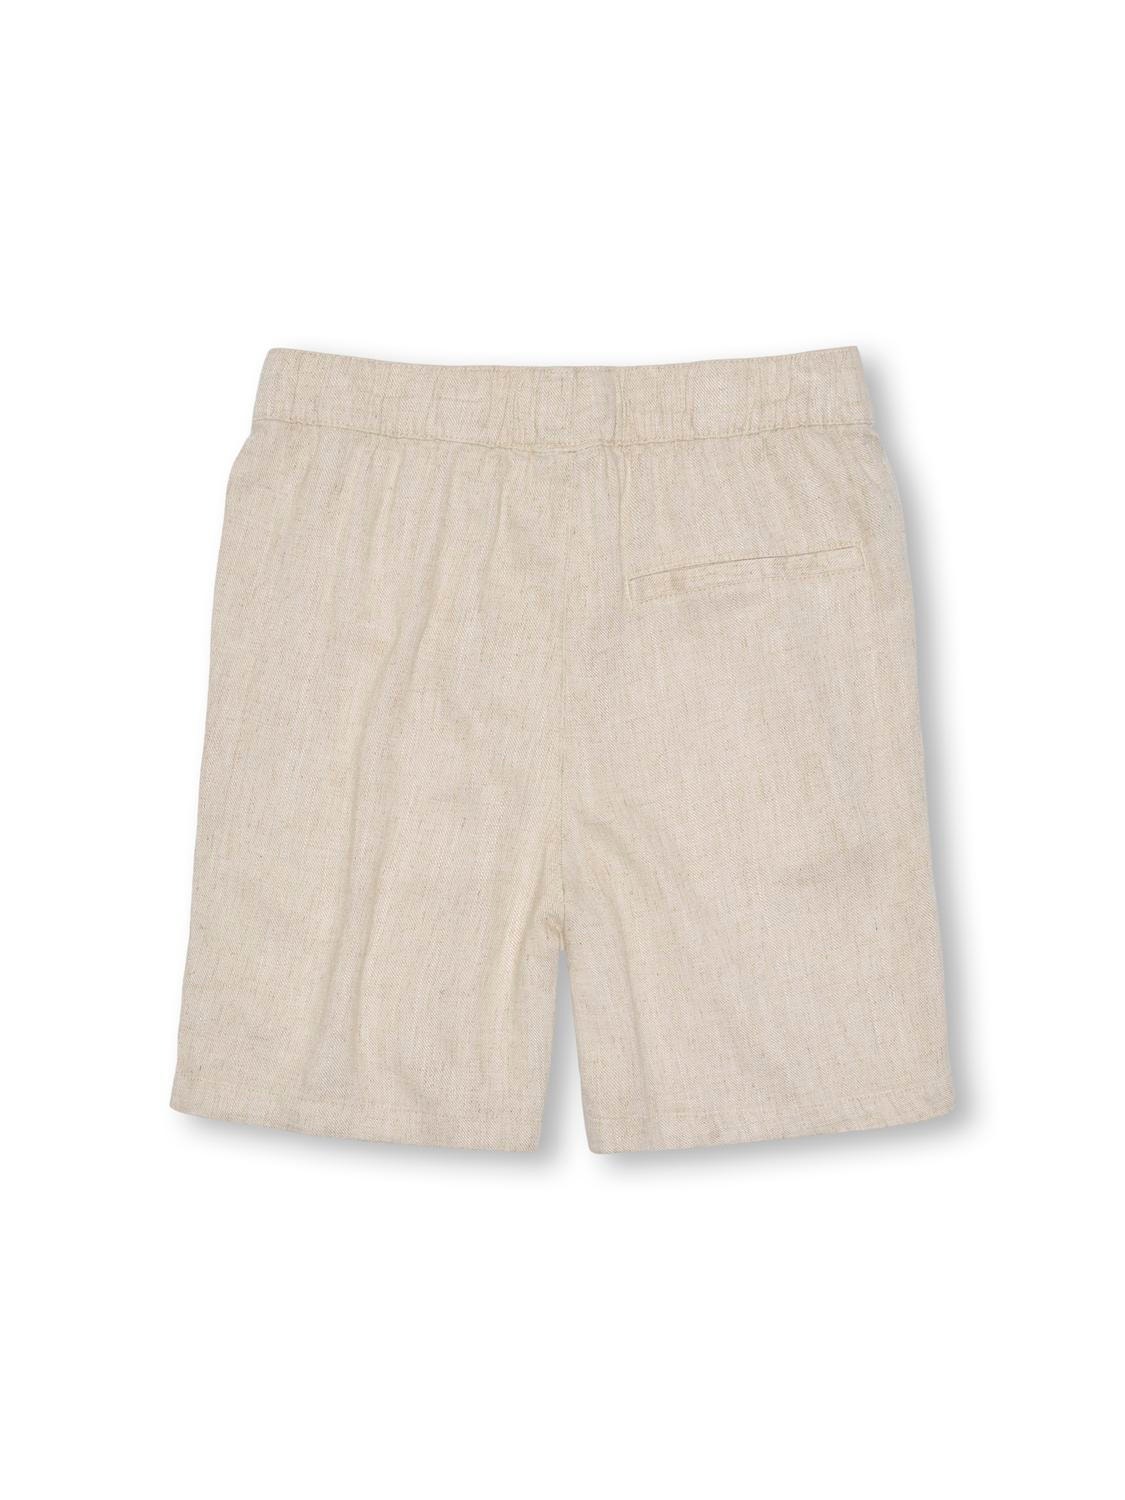 ONLY Regular fit Shorts -Oatmeal - 15327738